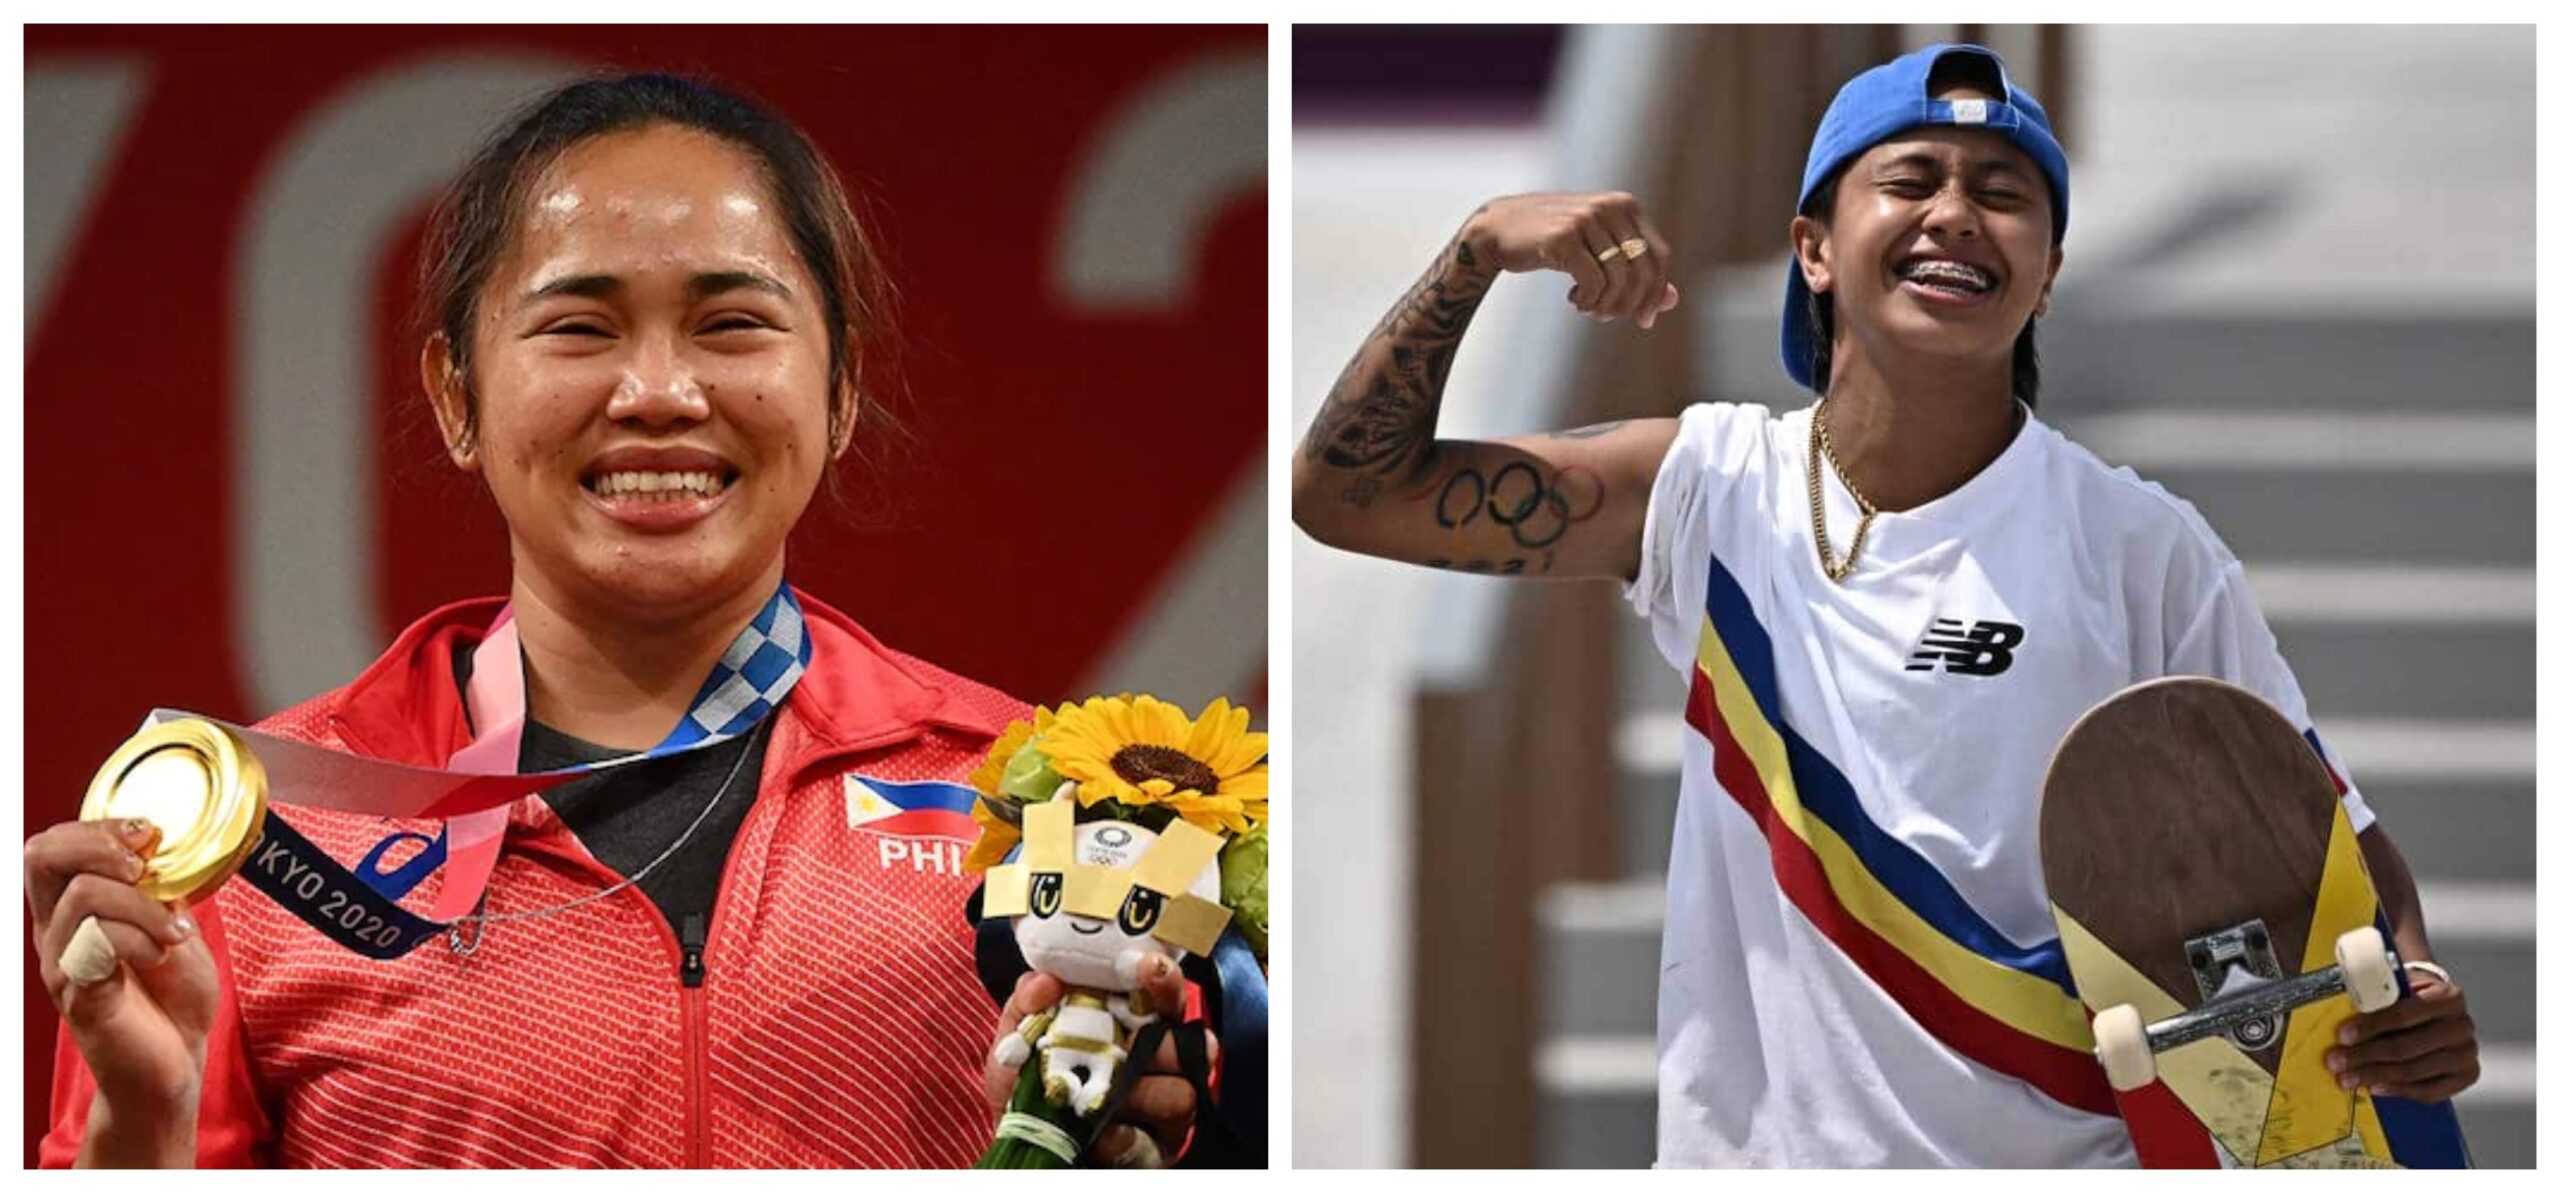 More than cash prizes and free houses, Filipino athletes should be